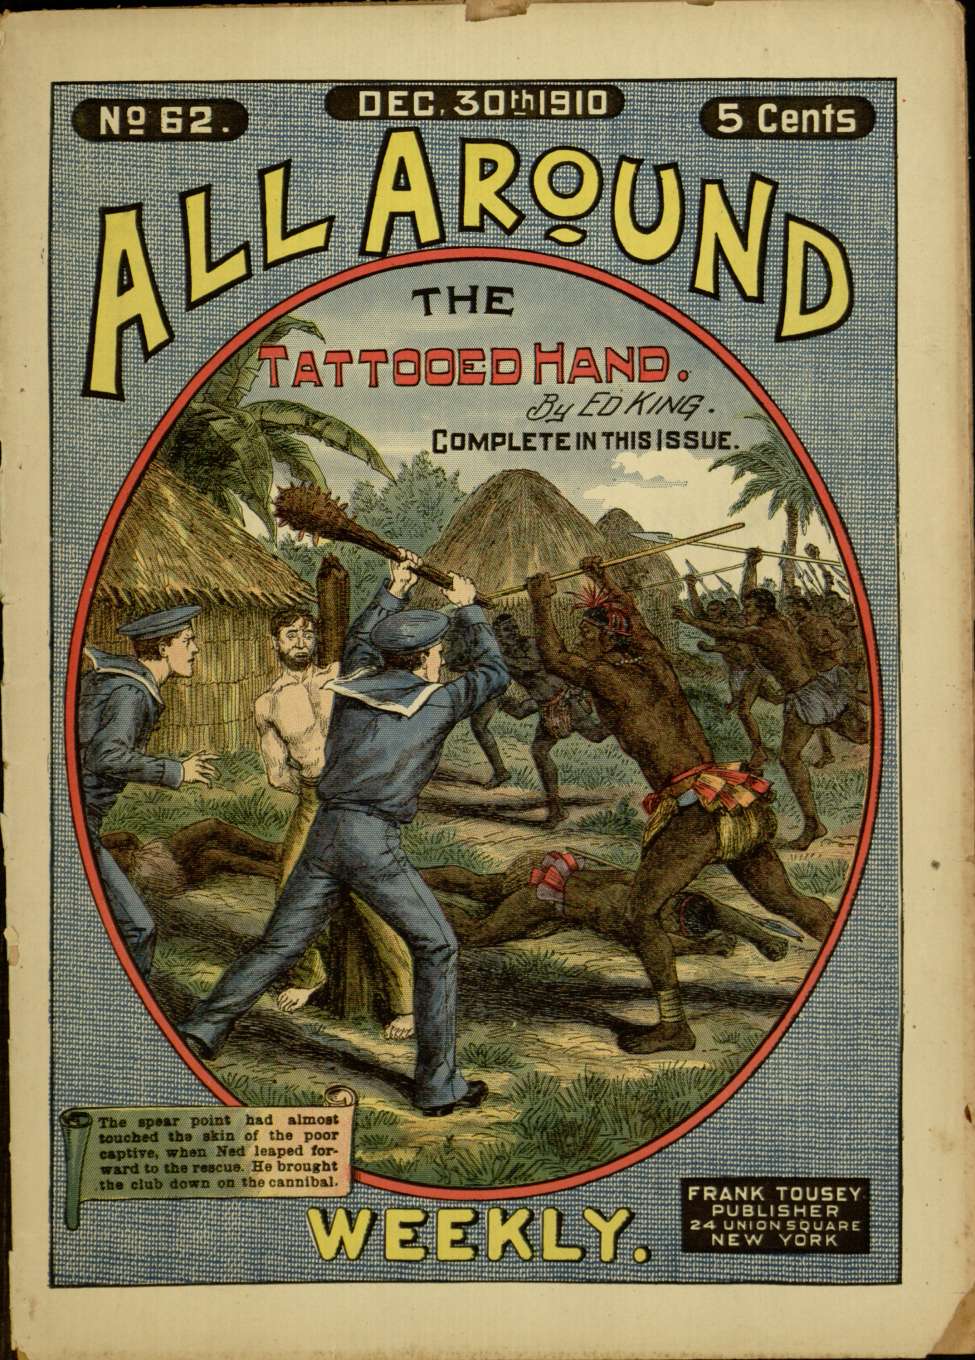 Book Cover For All Around Weekly 62 - The Tattooed Hand